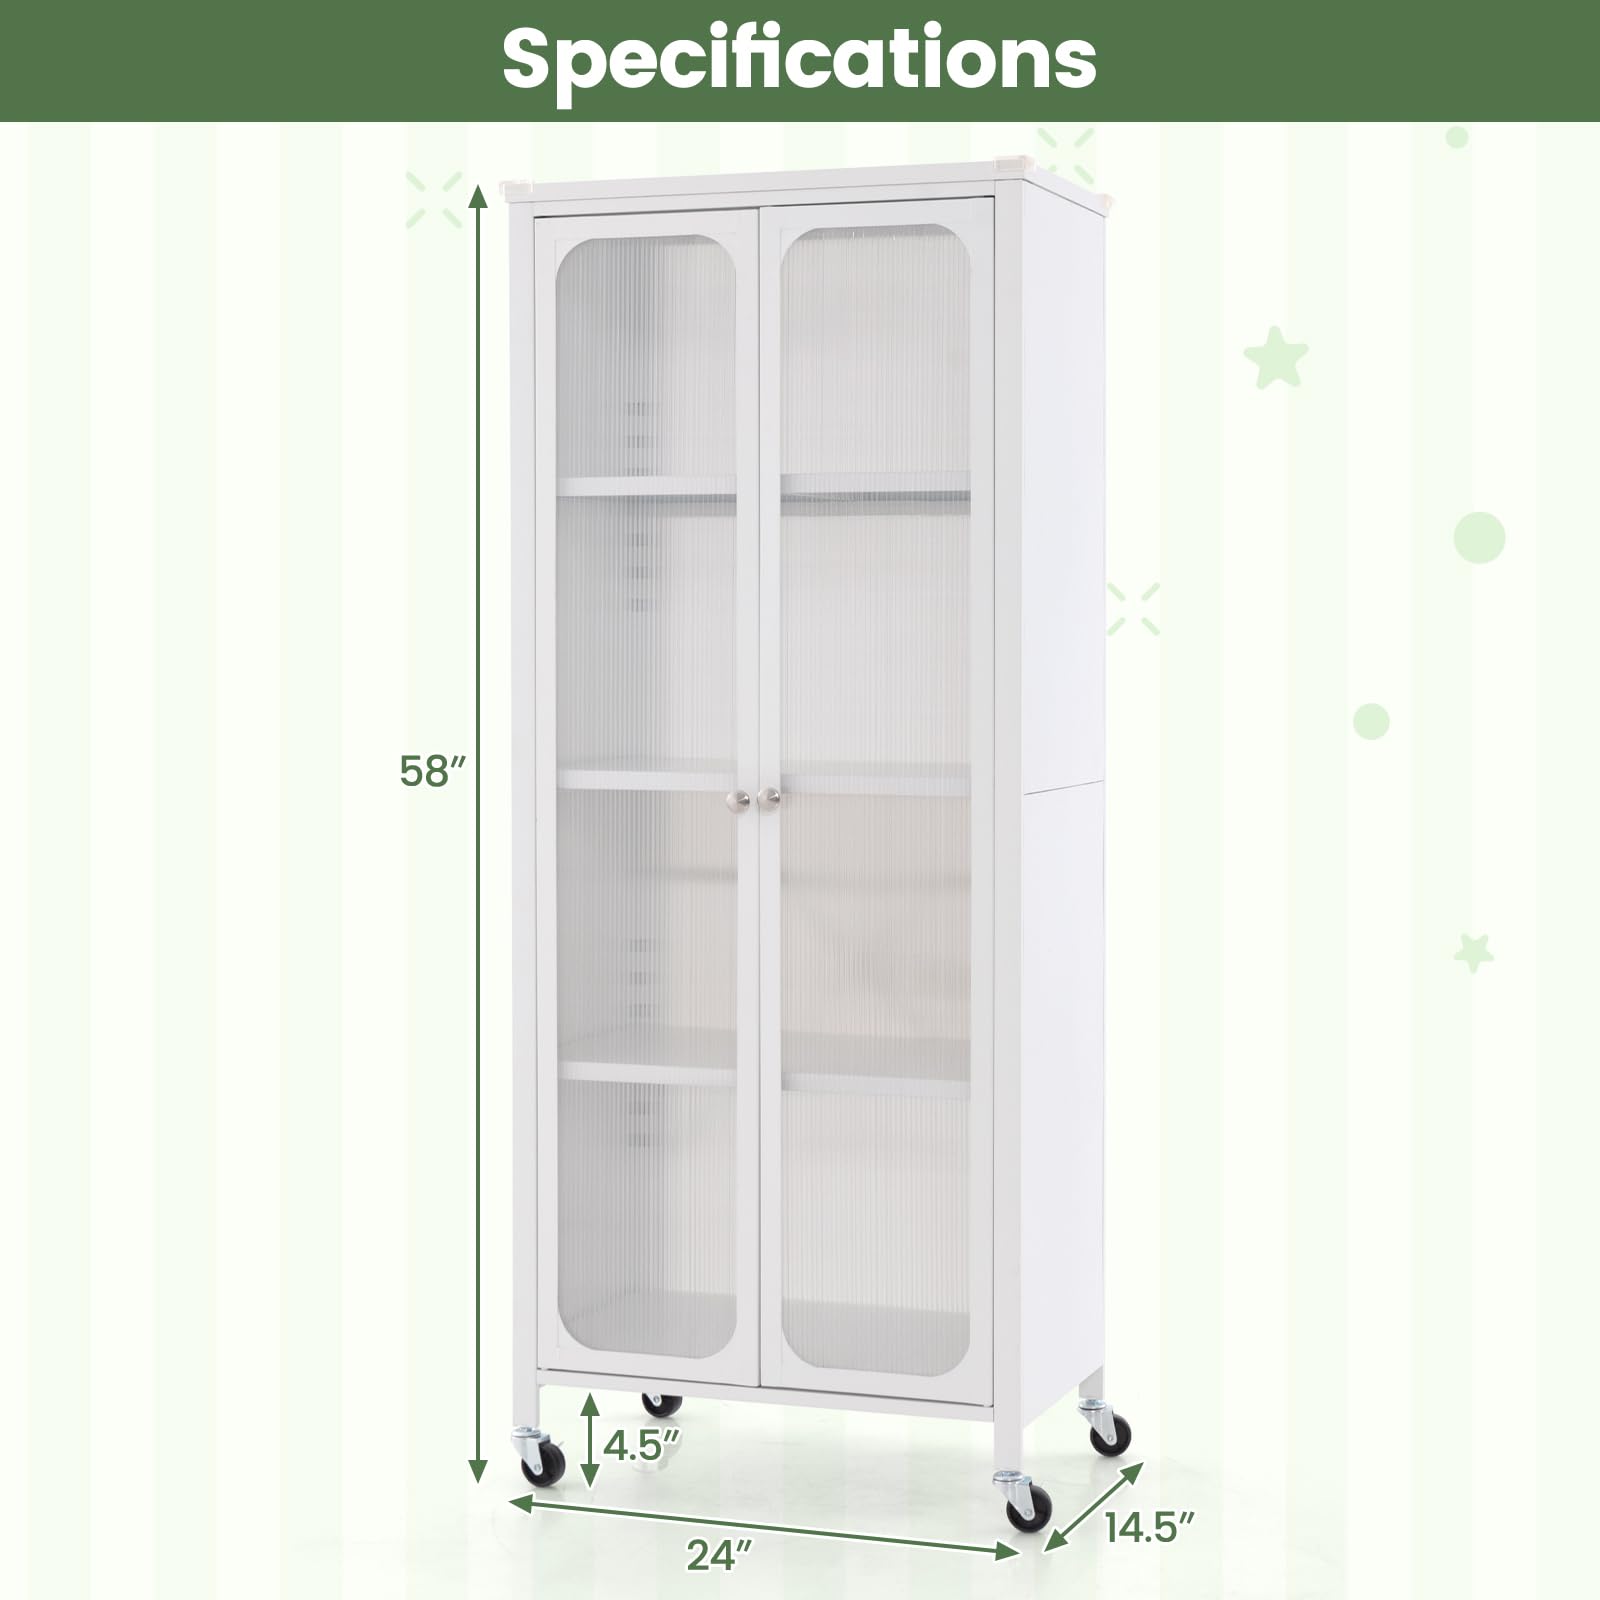 Giantex Bookcase with Doors, 58" Tall 4-Tier Bookshelf with Wheels, Adjustable Shelves (White)